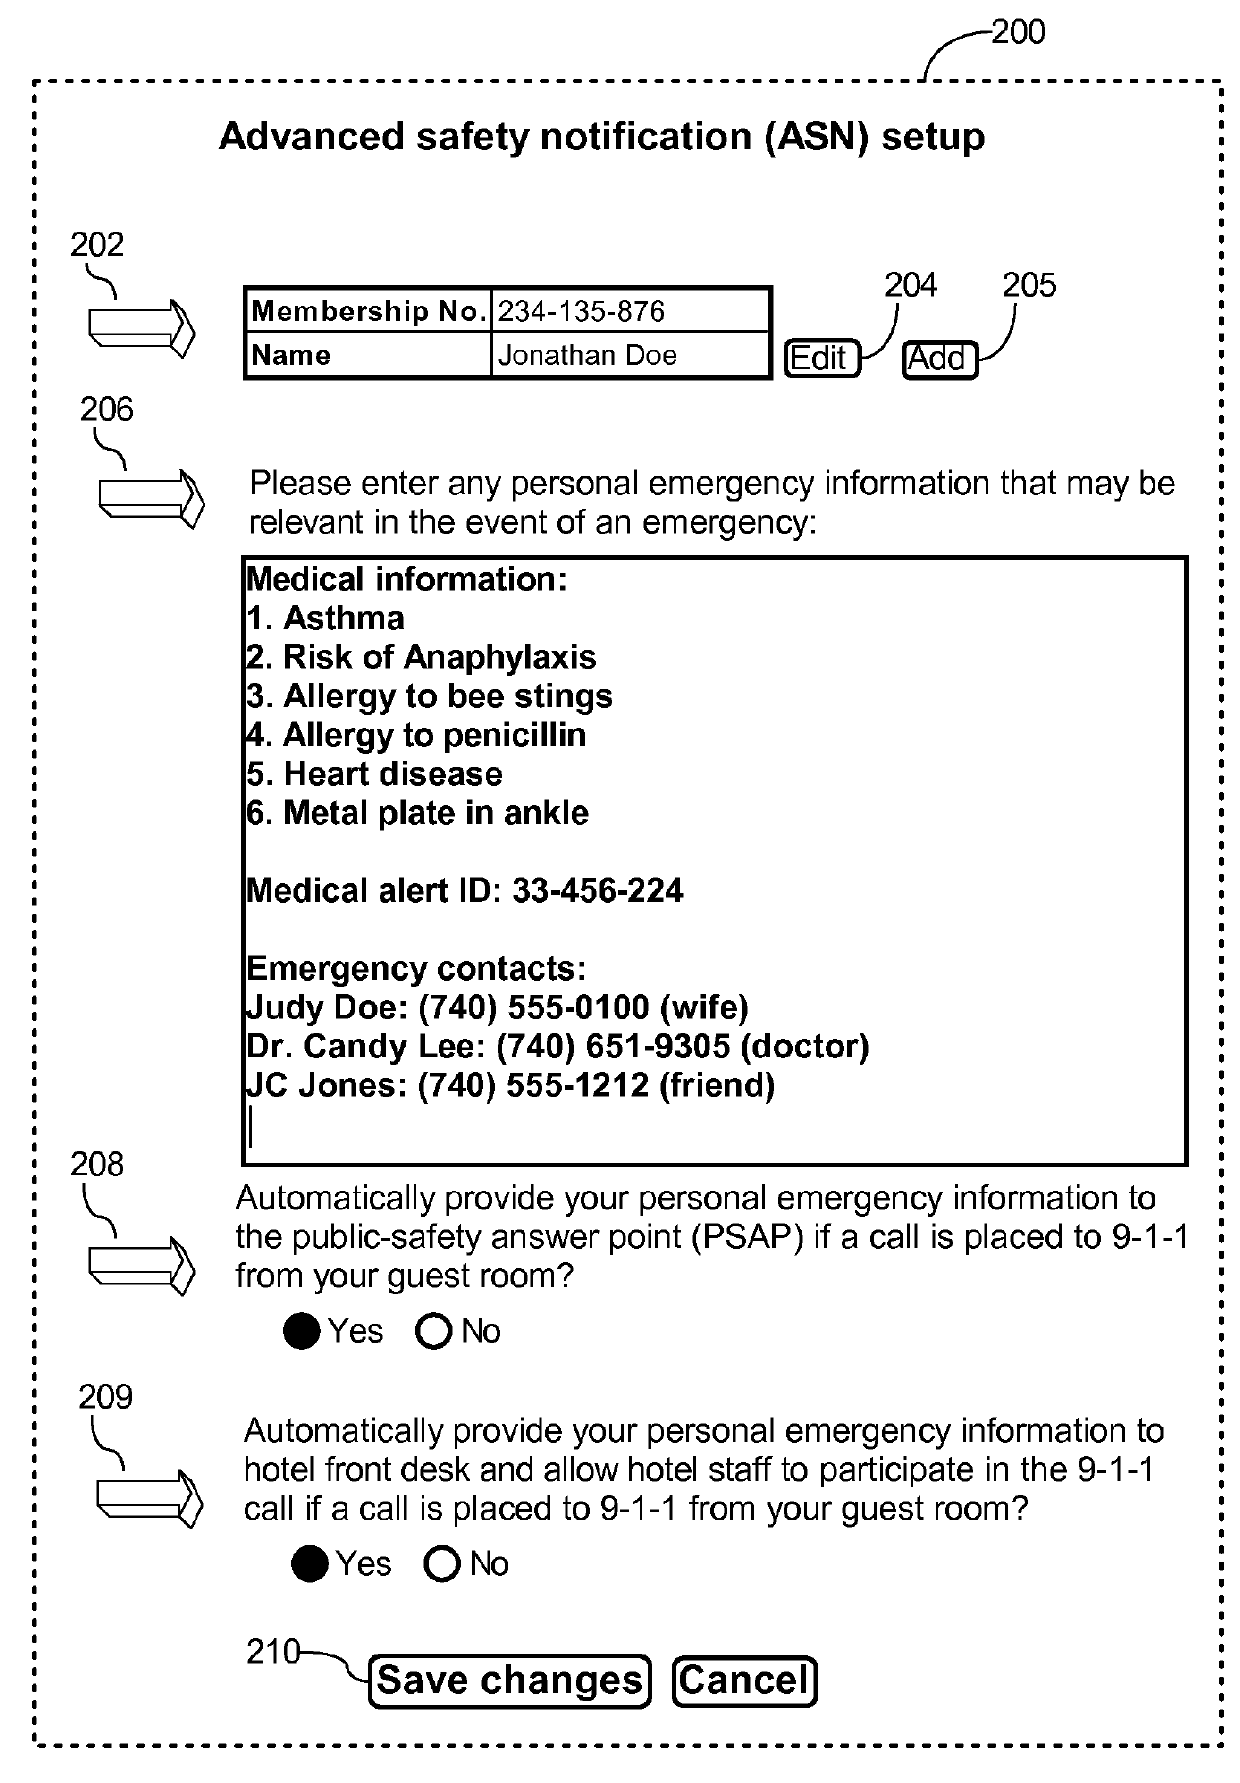 Providing to a public-safety answering point emergency information associated with an emergency call